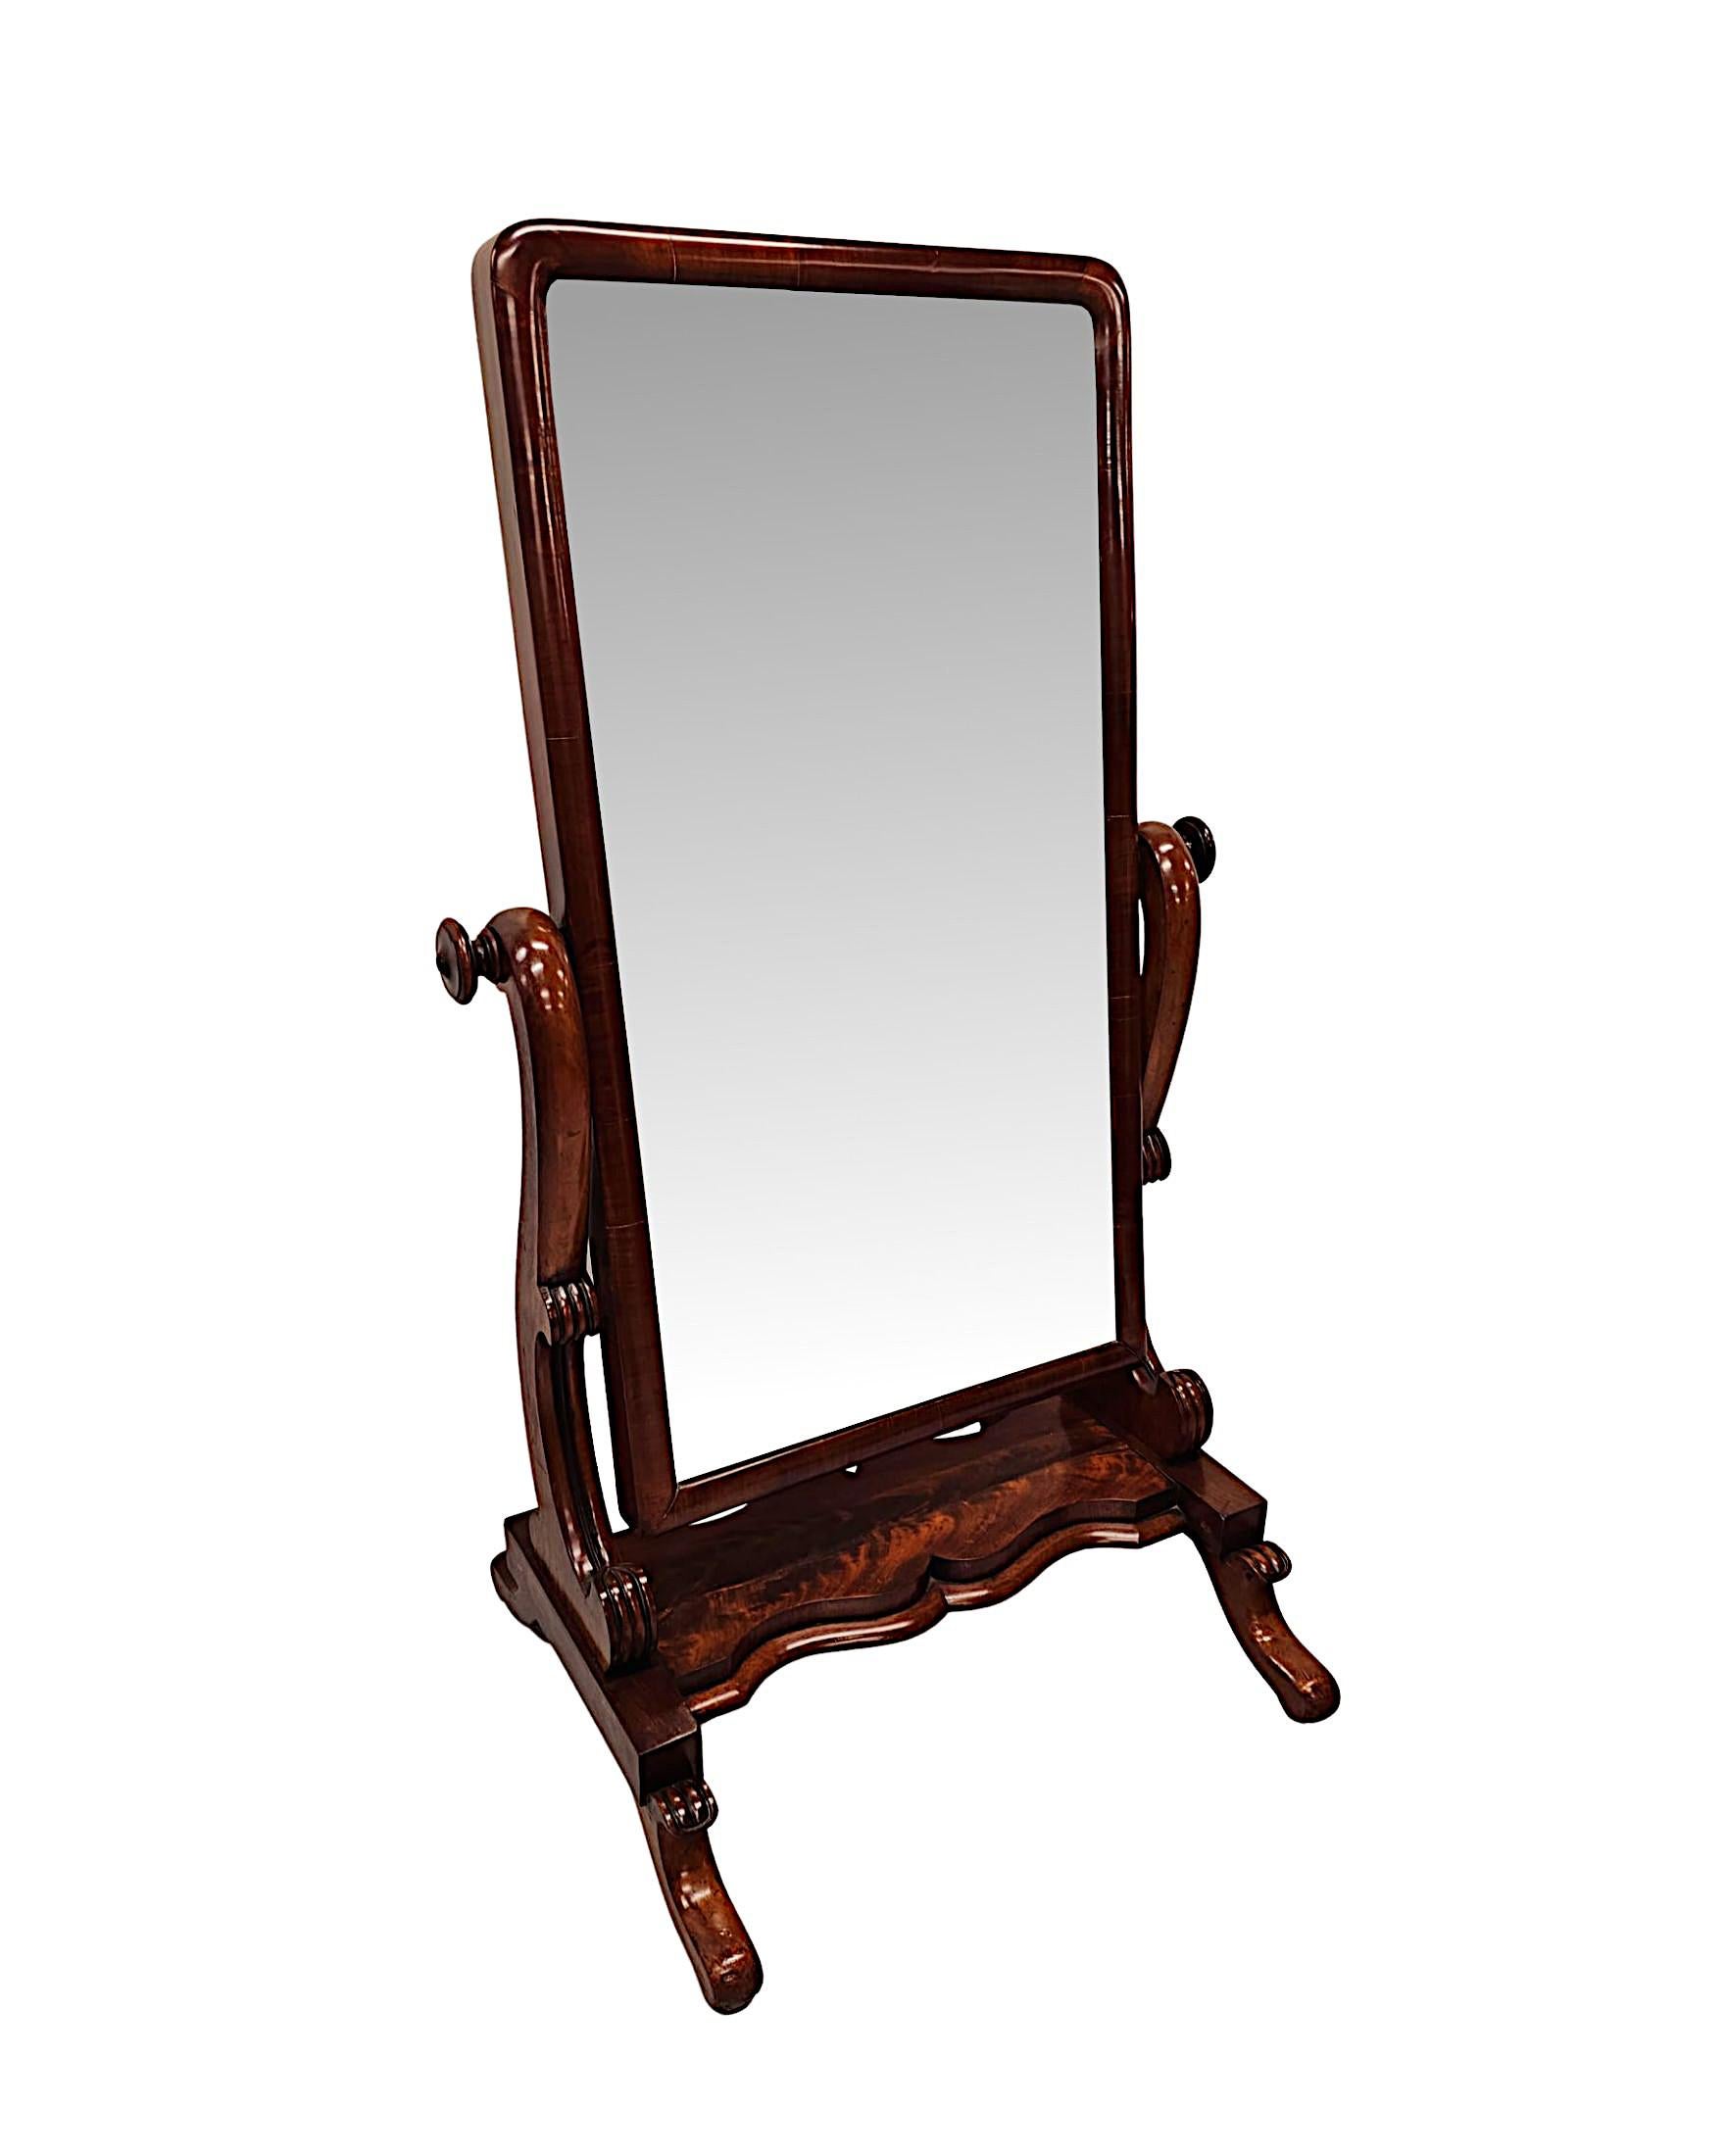 A very fine 19th Century flame mahogany cheval mirror fabulously hand carved, of exceptional quality with gorgeously rich patination and grain.  The bevelled mirror glass plate of rectangular form is set within a finely figured and elegantly simple,